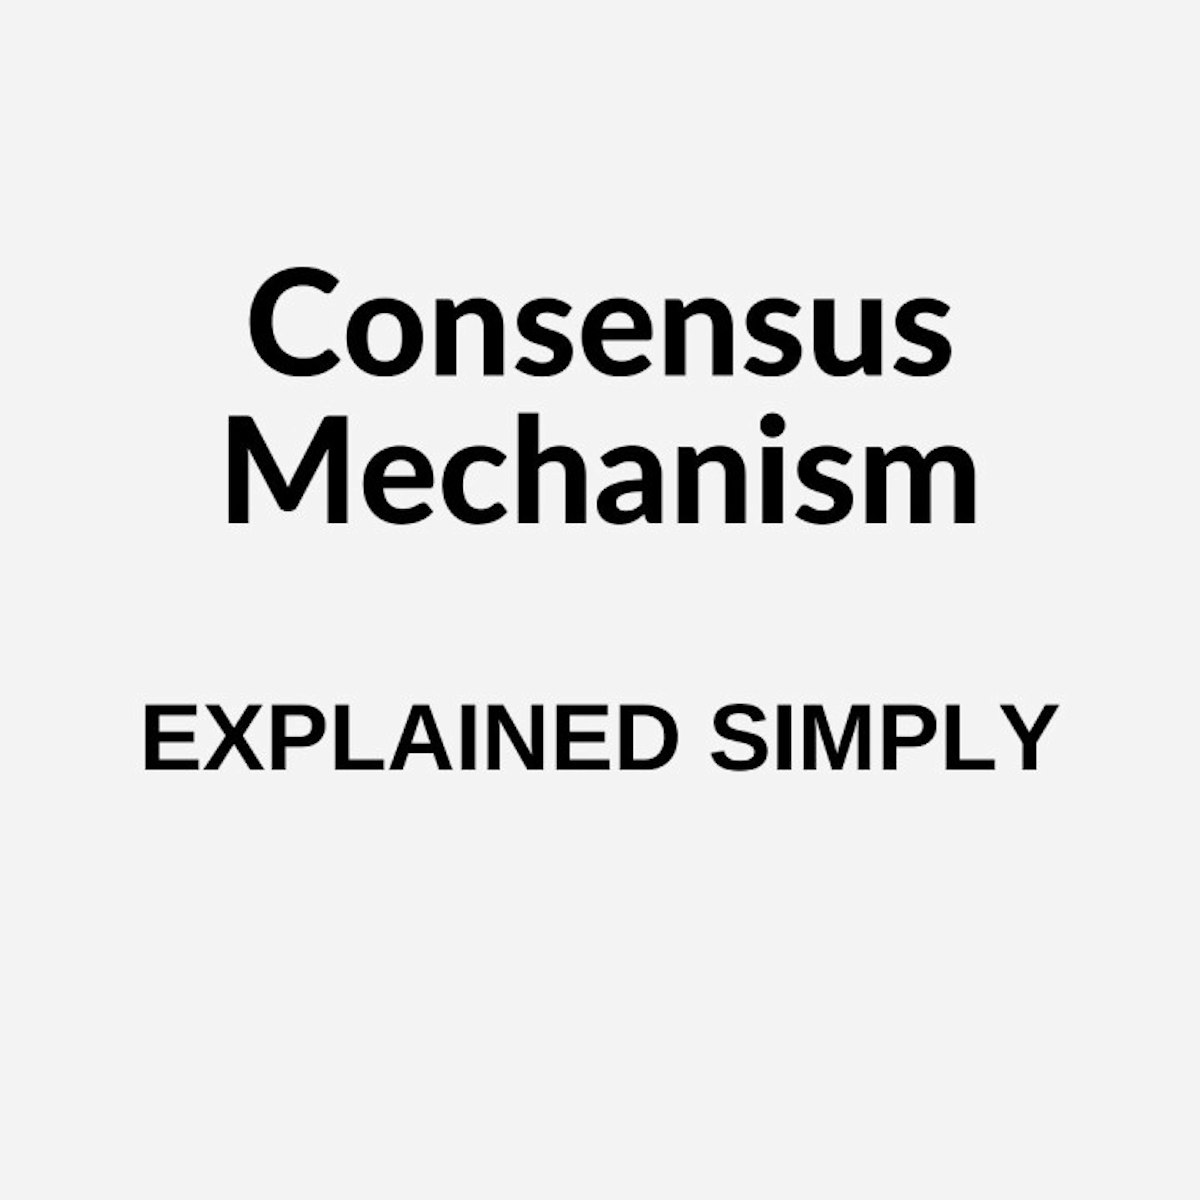 featured image - Consensus Mechanisms in Blockchain [Explained]